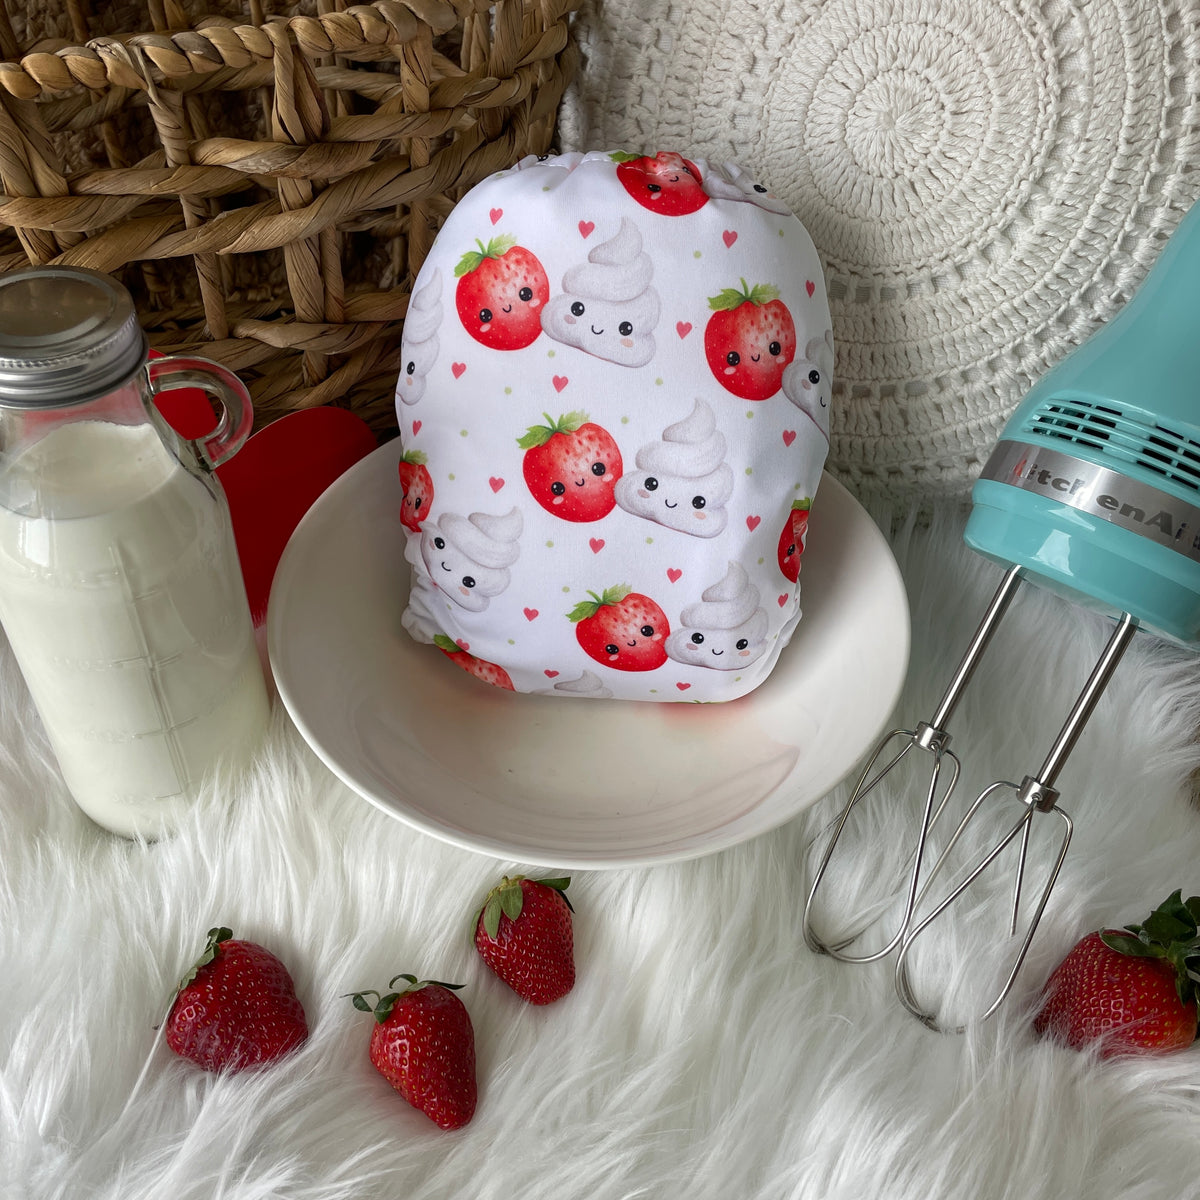 Les Confections Lili | Washable diaper | LARGE size | The love birds - Strawberry & Cream (Full Print)